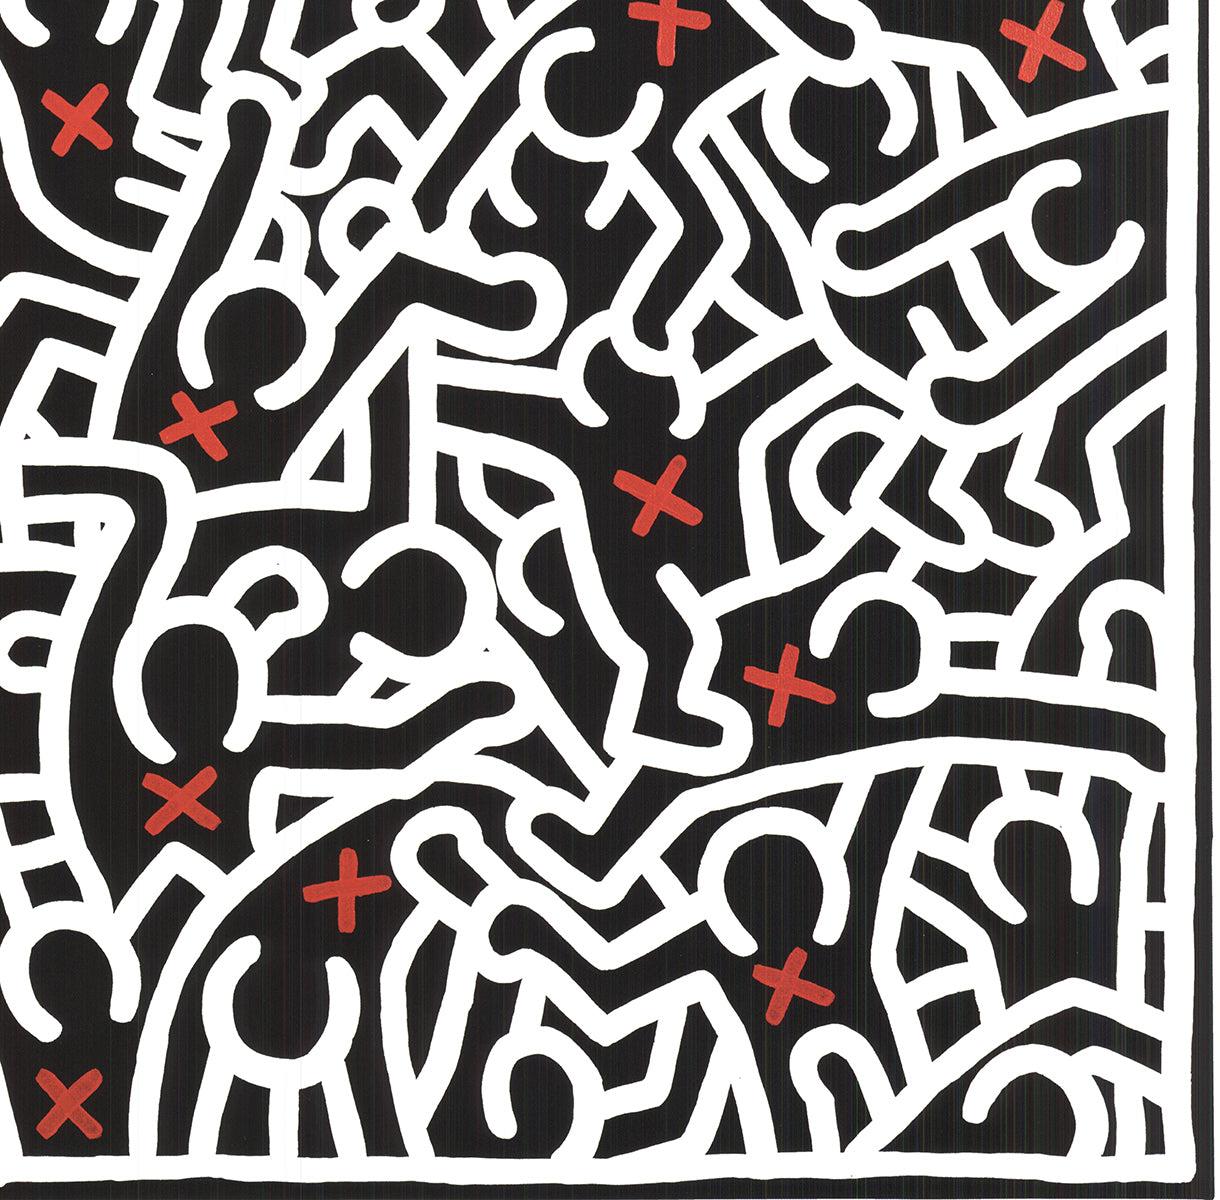 Keith Haring « Untitled, 1985 » 2009- Lithographie offset en vente 3